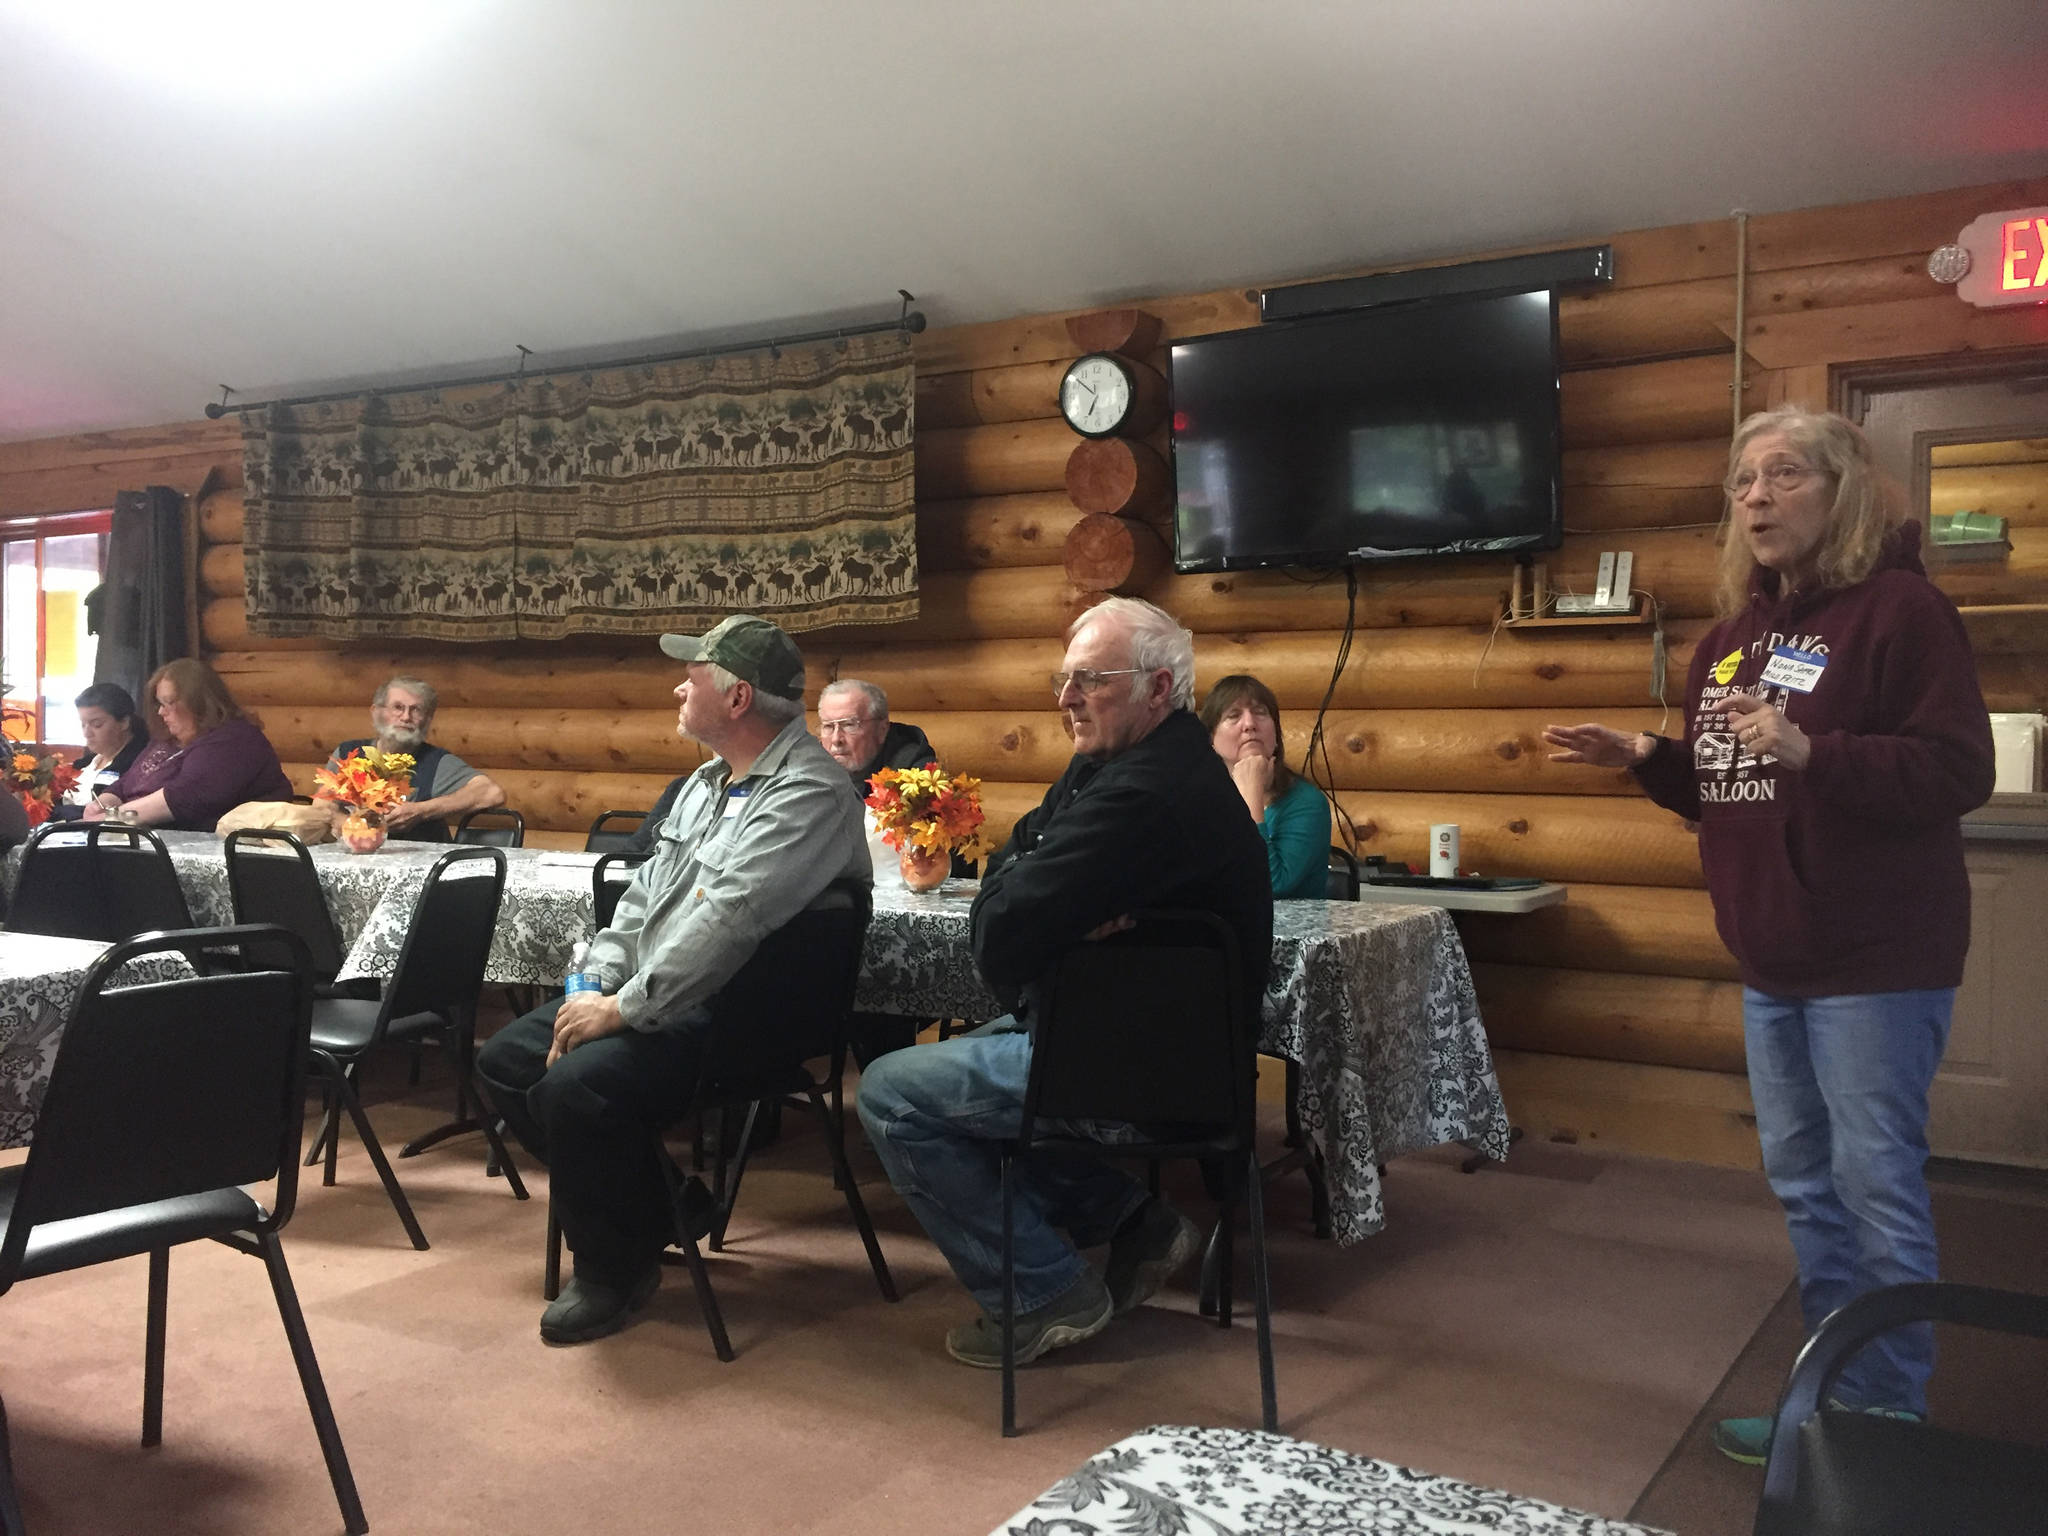 Nona Safra welcomes community members to the third Anchor Point Neighborhood Watch meeting on Thursday, Sept. 20, 2018 the senior center in Anchor Point, Alaska. (Photo by Delcenia Cosman)